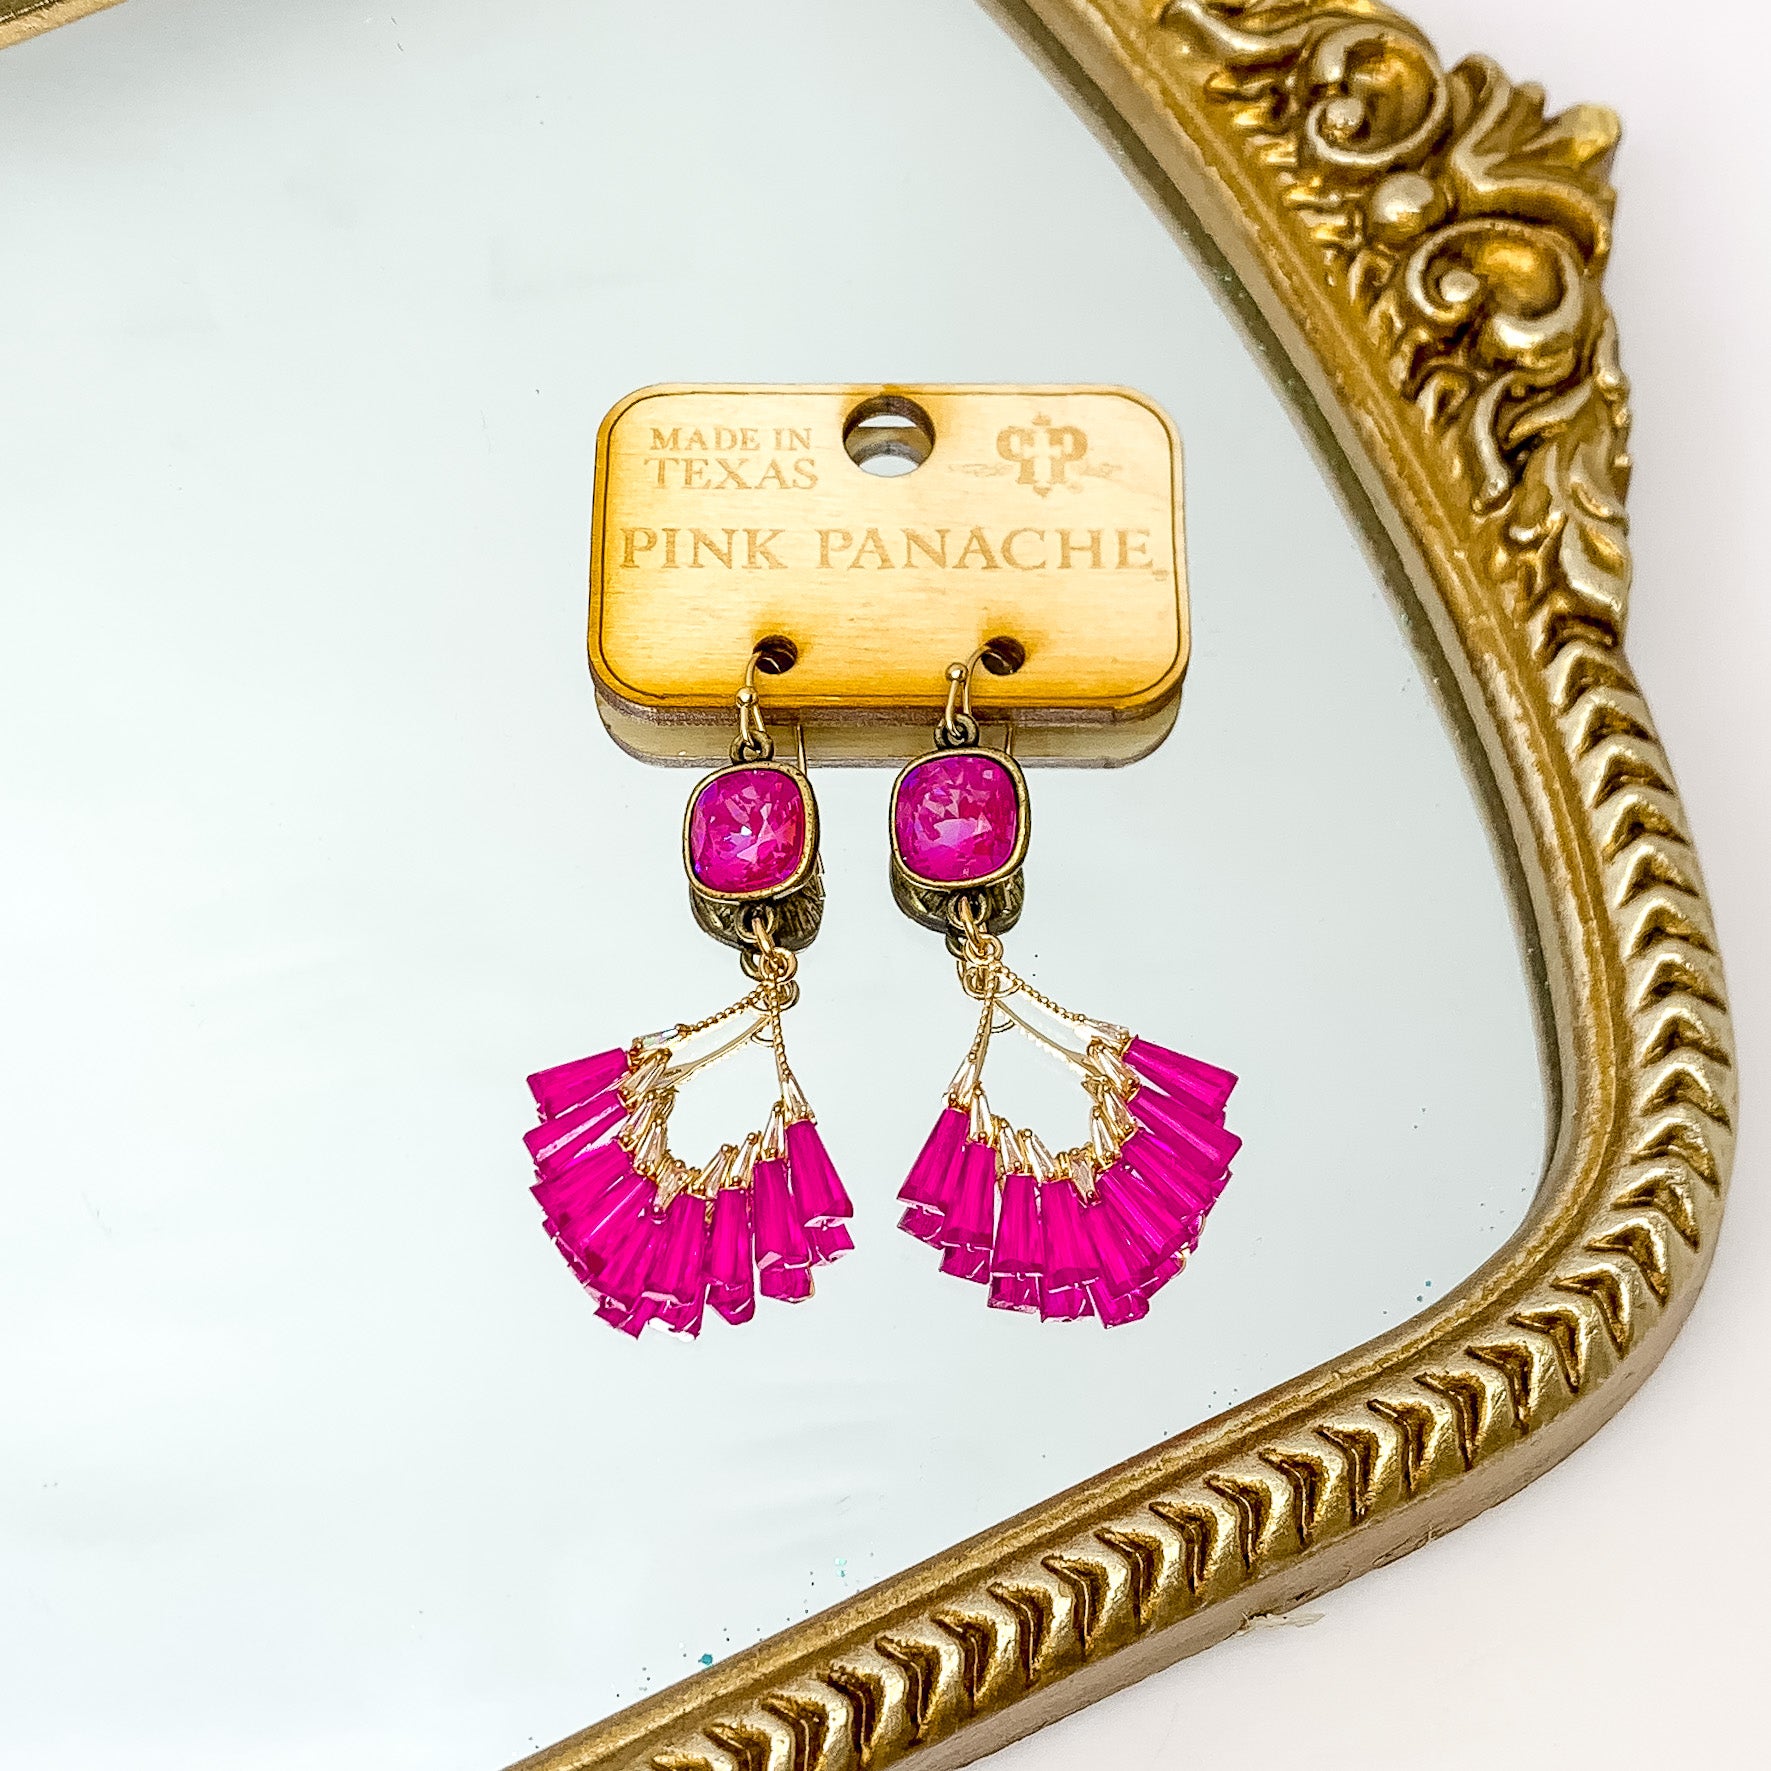 Pink Panache | Royal Red Delight Cushion Cut Drop Earrings with Gold Tone Diamond Pendant and Fuchsia Pink Beads